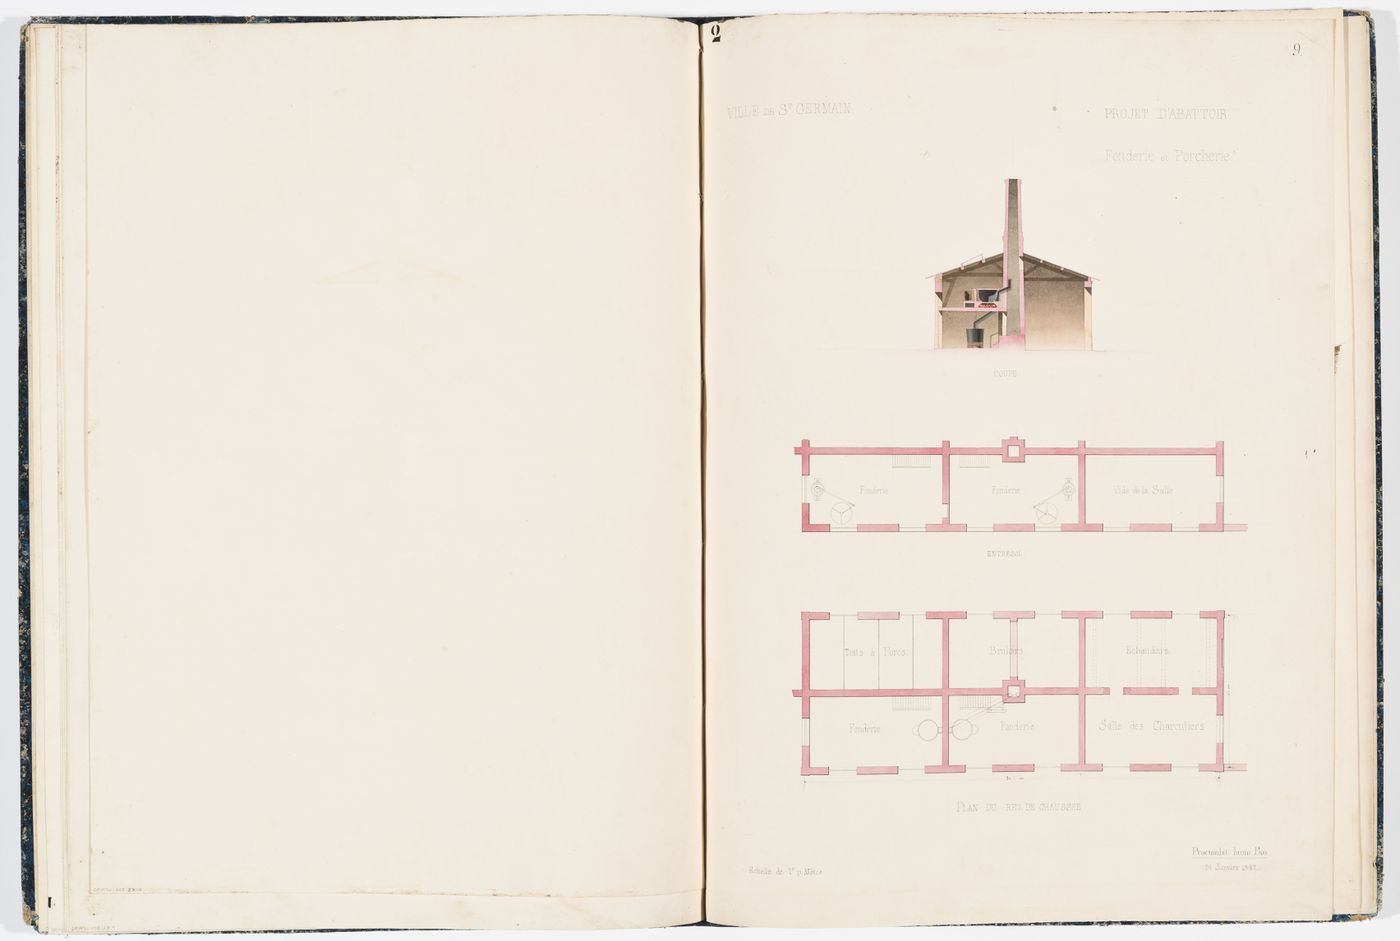 Cross section and ground floor and "entresol" plans for the "porcherie", including the "fonderie"